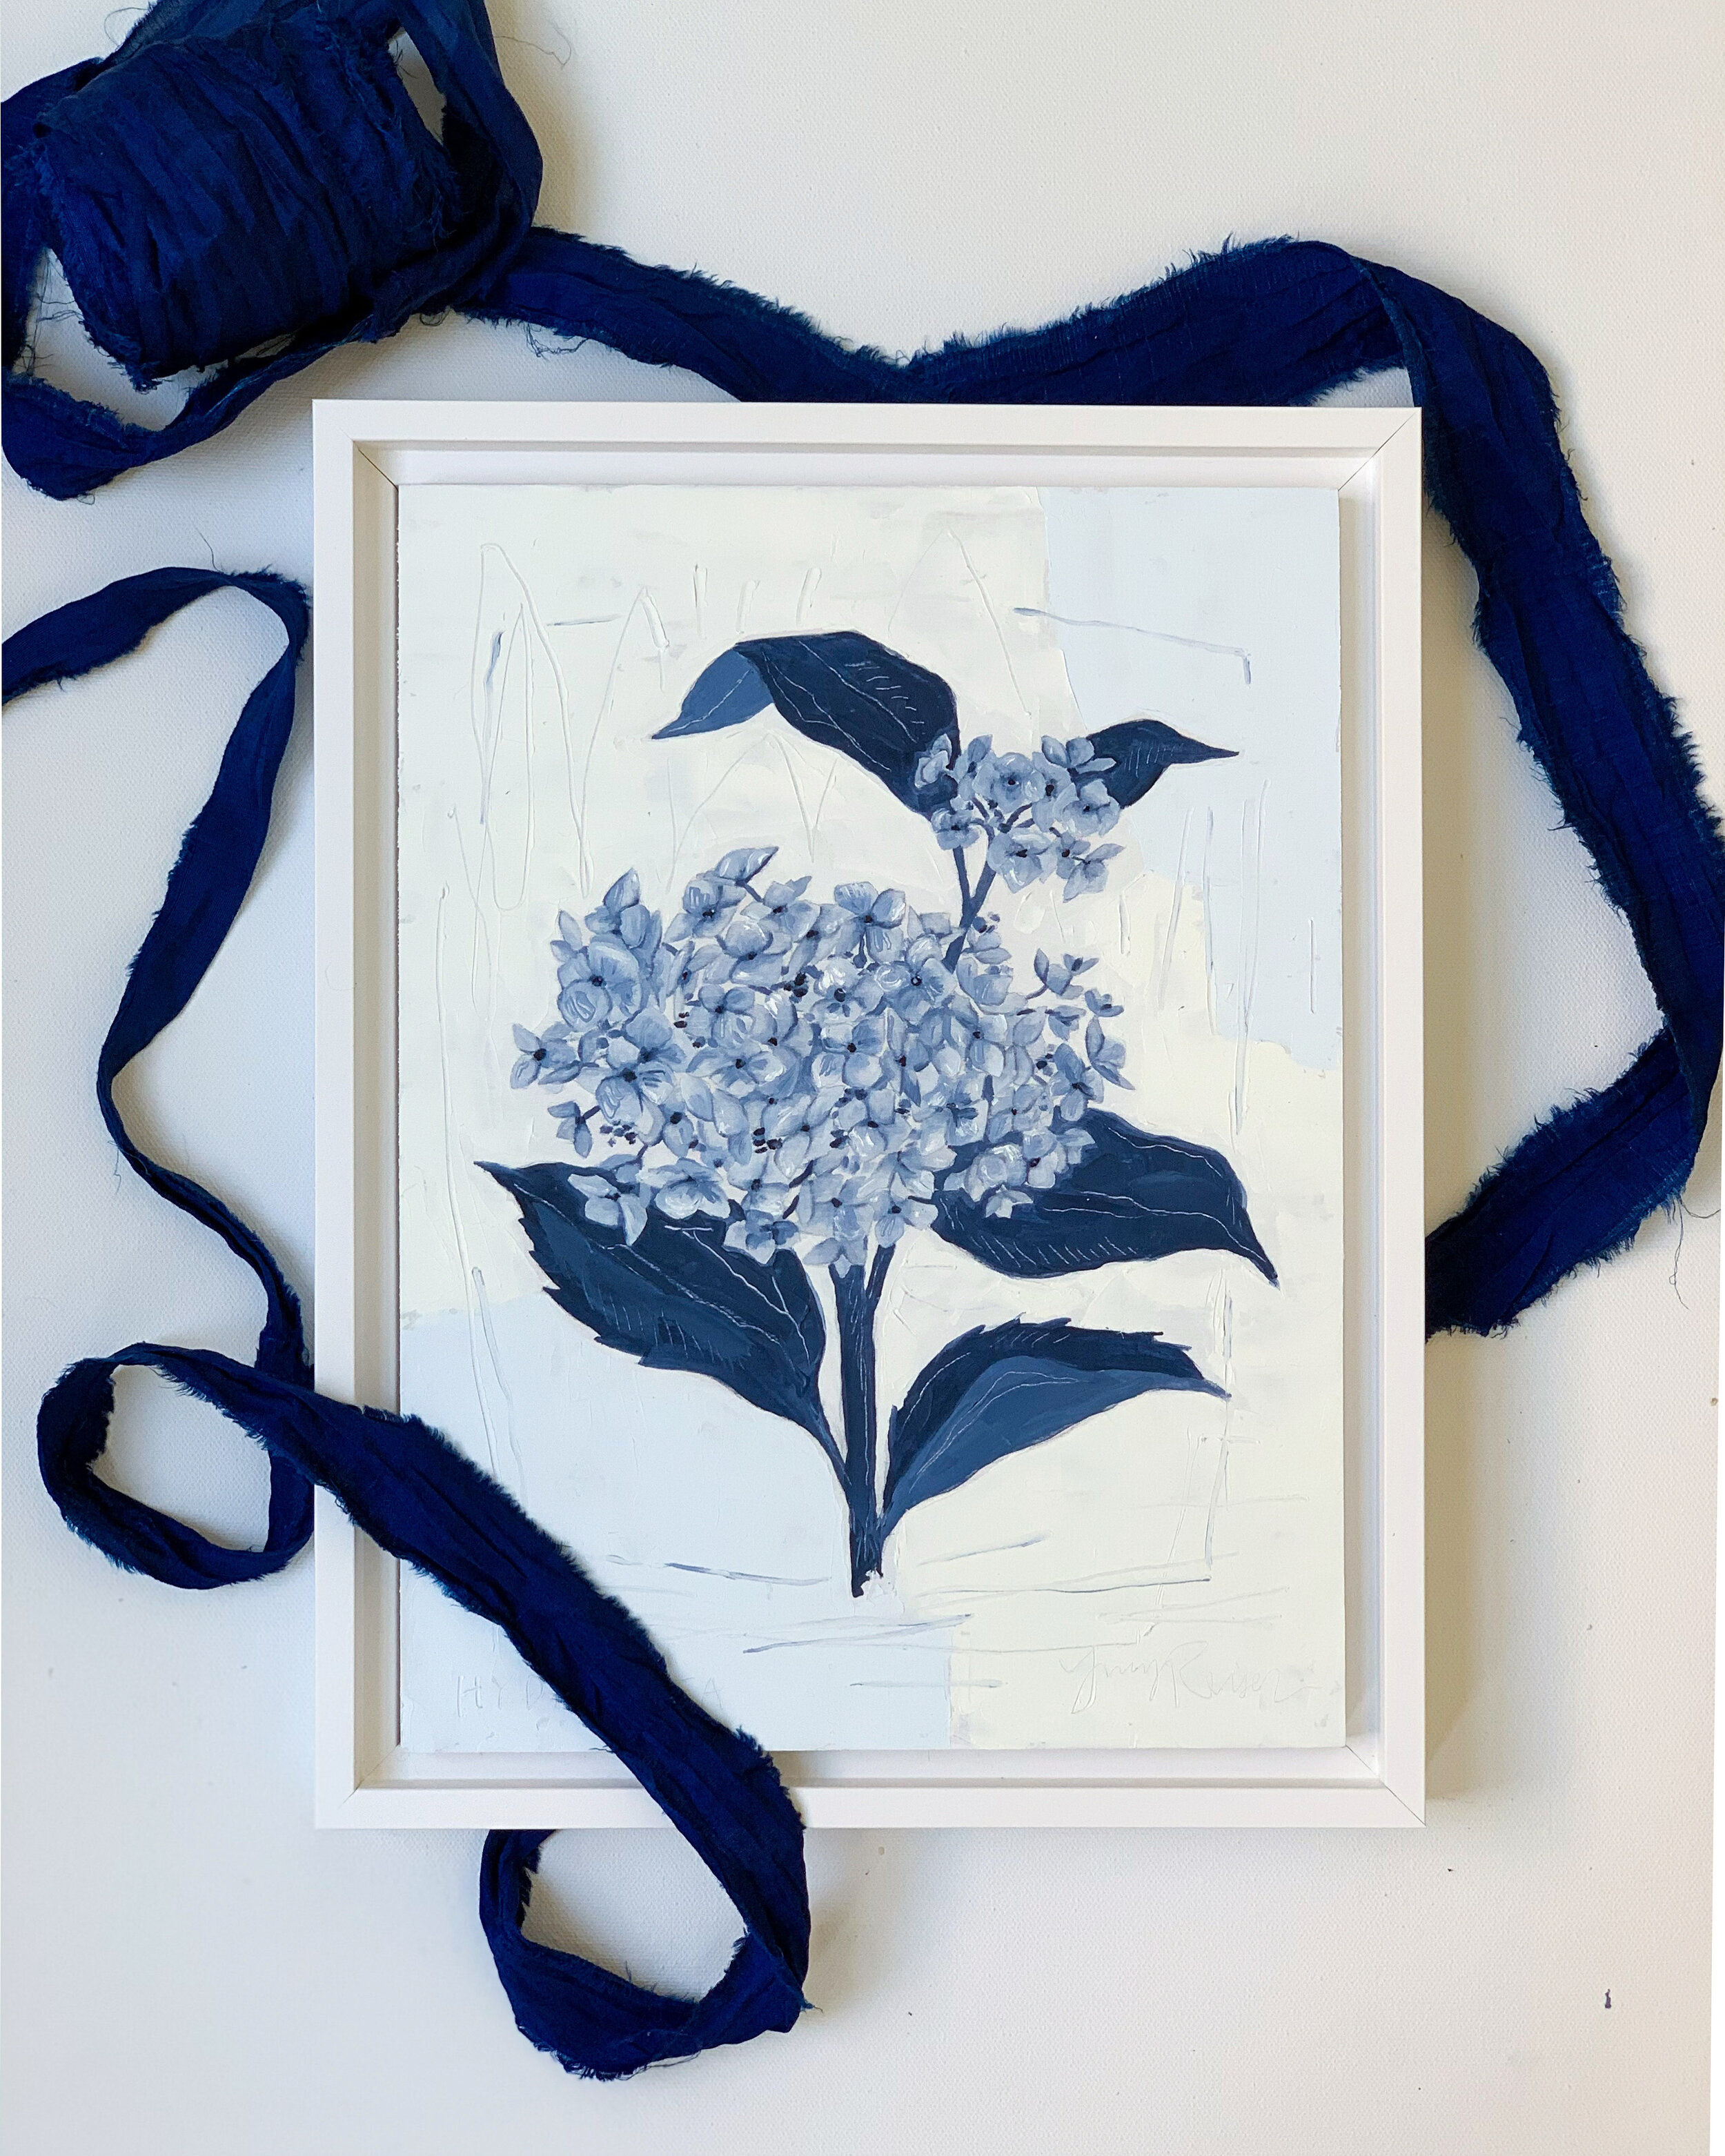 Shipped all the Blue Botanicals off to their new homes, including this lovely Hydrangea.